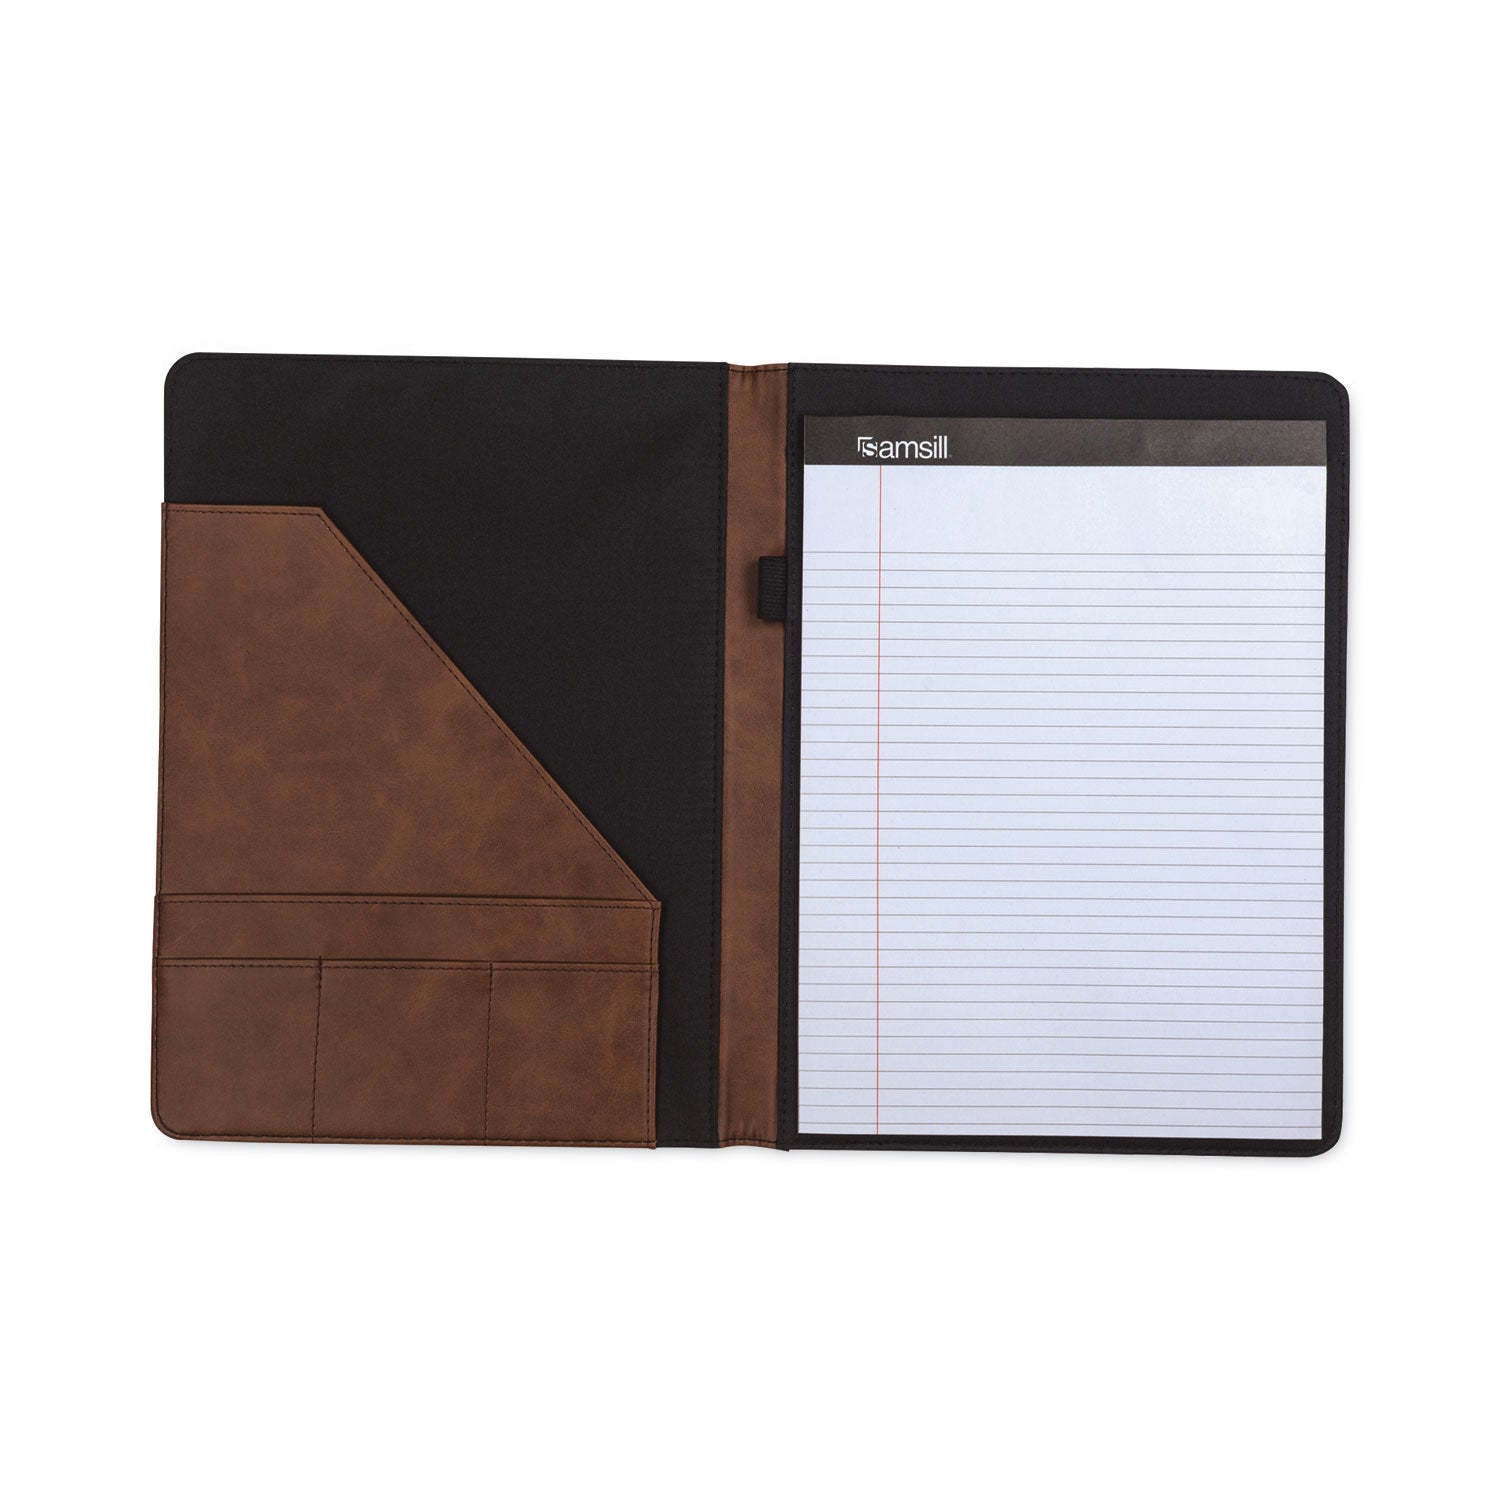 two-tone-padfolio-with-spine-accent-106w-x-1425h-polyurethane-tan-brown_sam71656 - 8